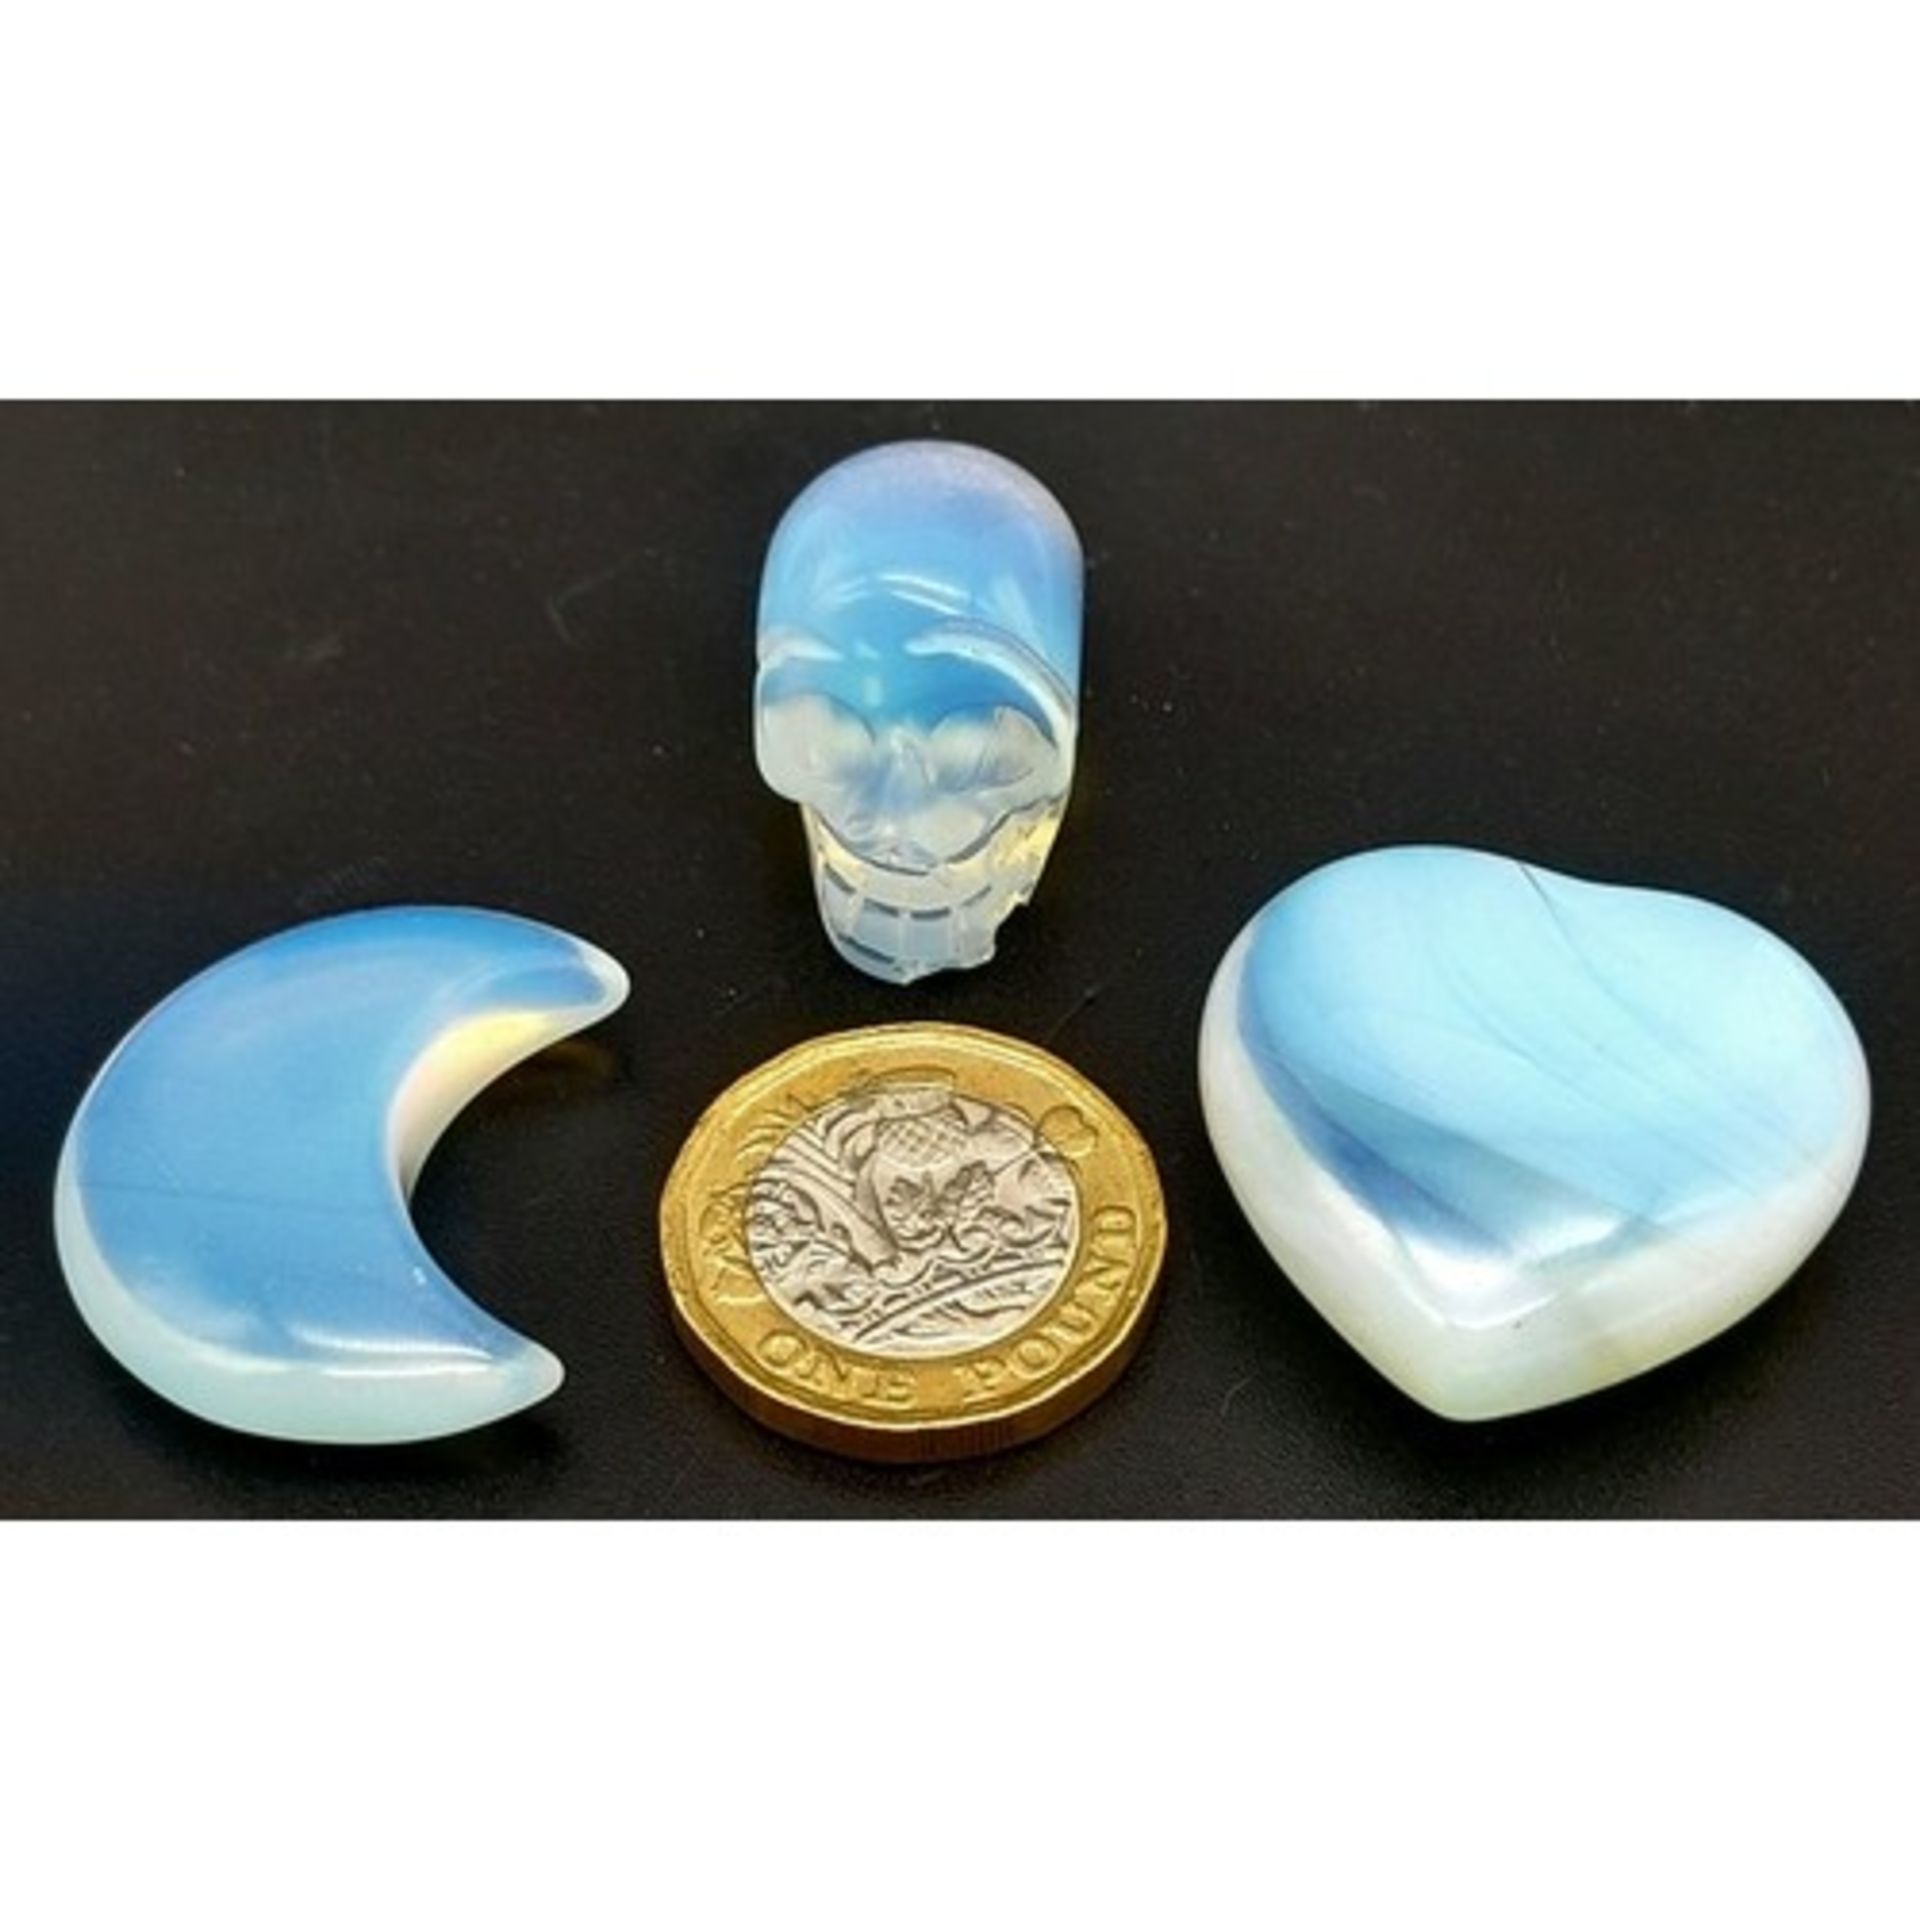 Parcel of 4 Opalite Figurines Featuring a Dog, Skull, Heart & Moon. - Image 4 of 4